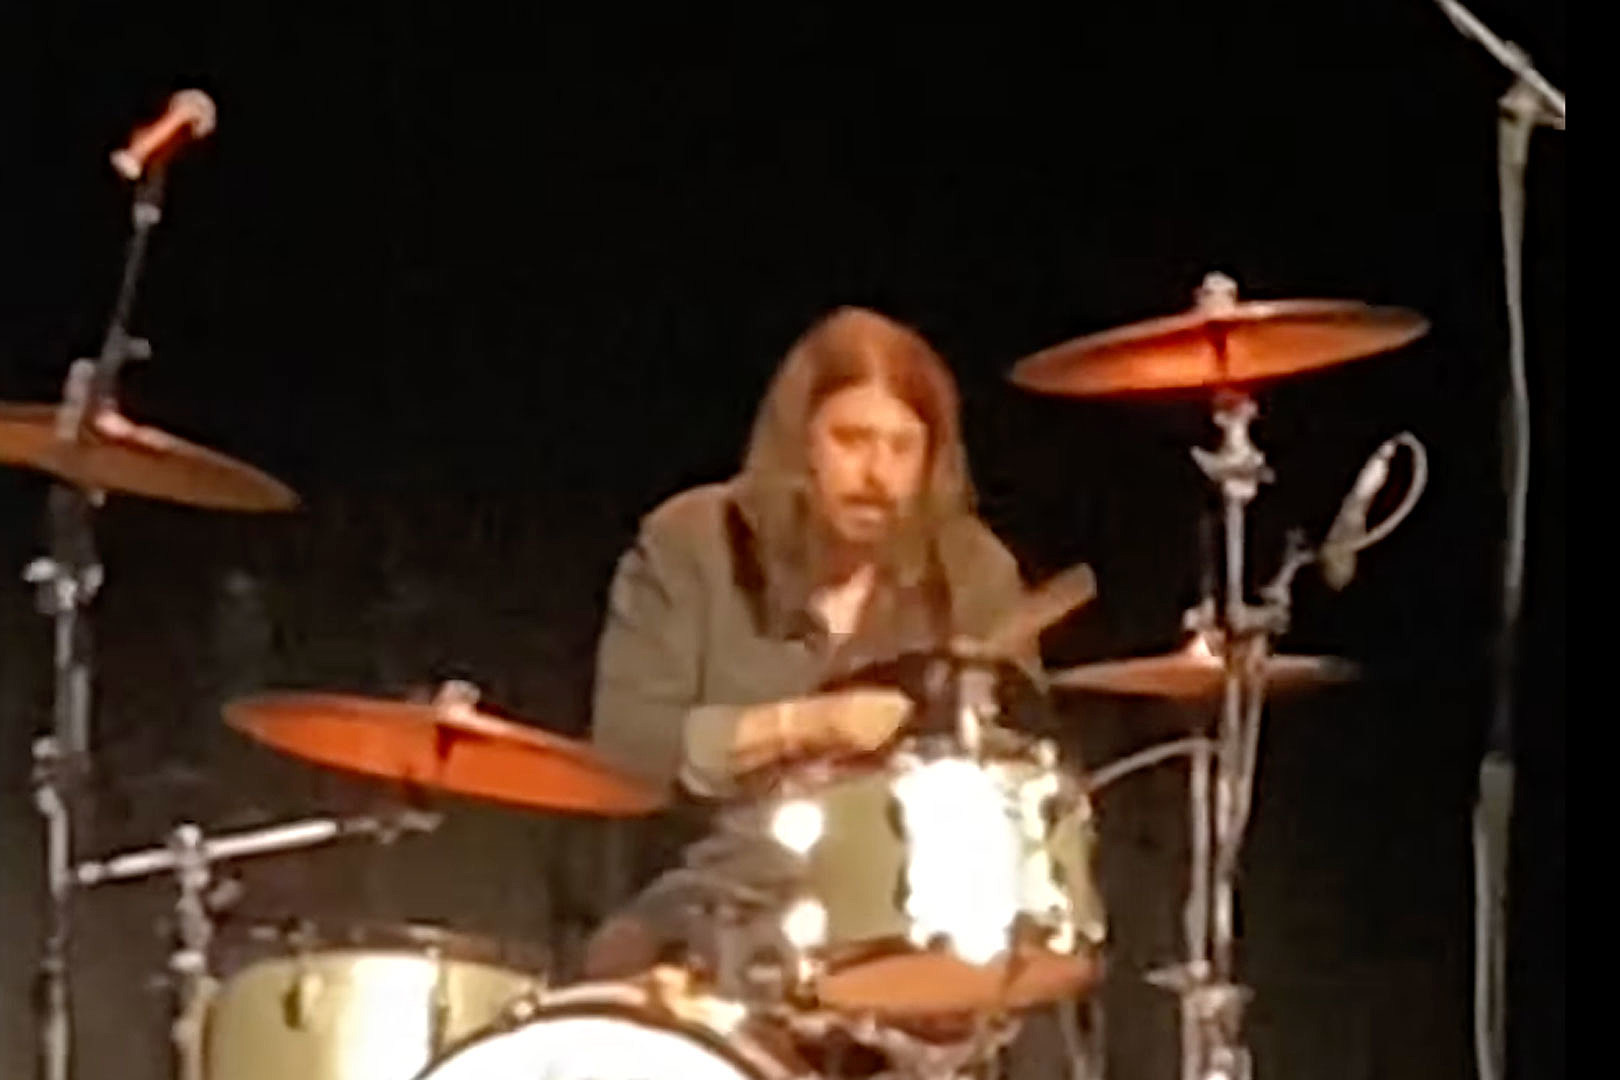 Attachment Dave Grohl Drumming To Smells Like Teen Spirit 2021 